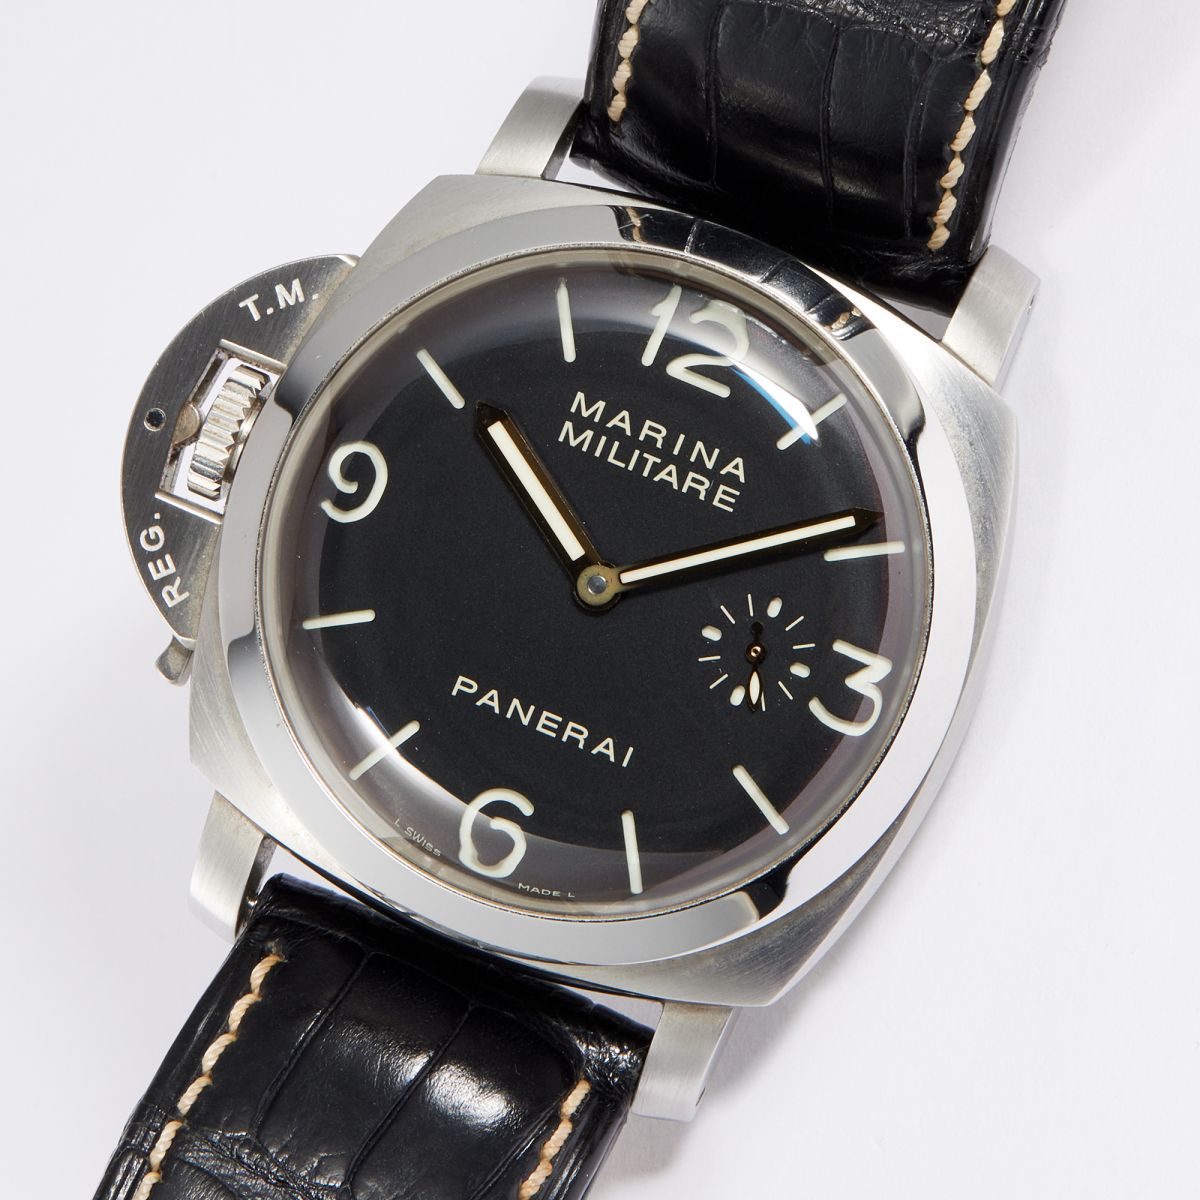 Luminor 1950 Marina Militare Stainless Steel Black Dial Limited Edition